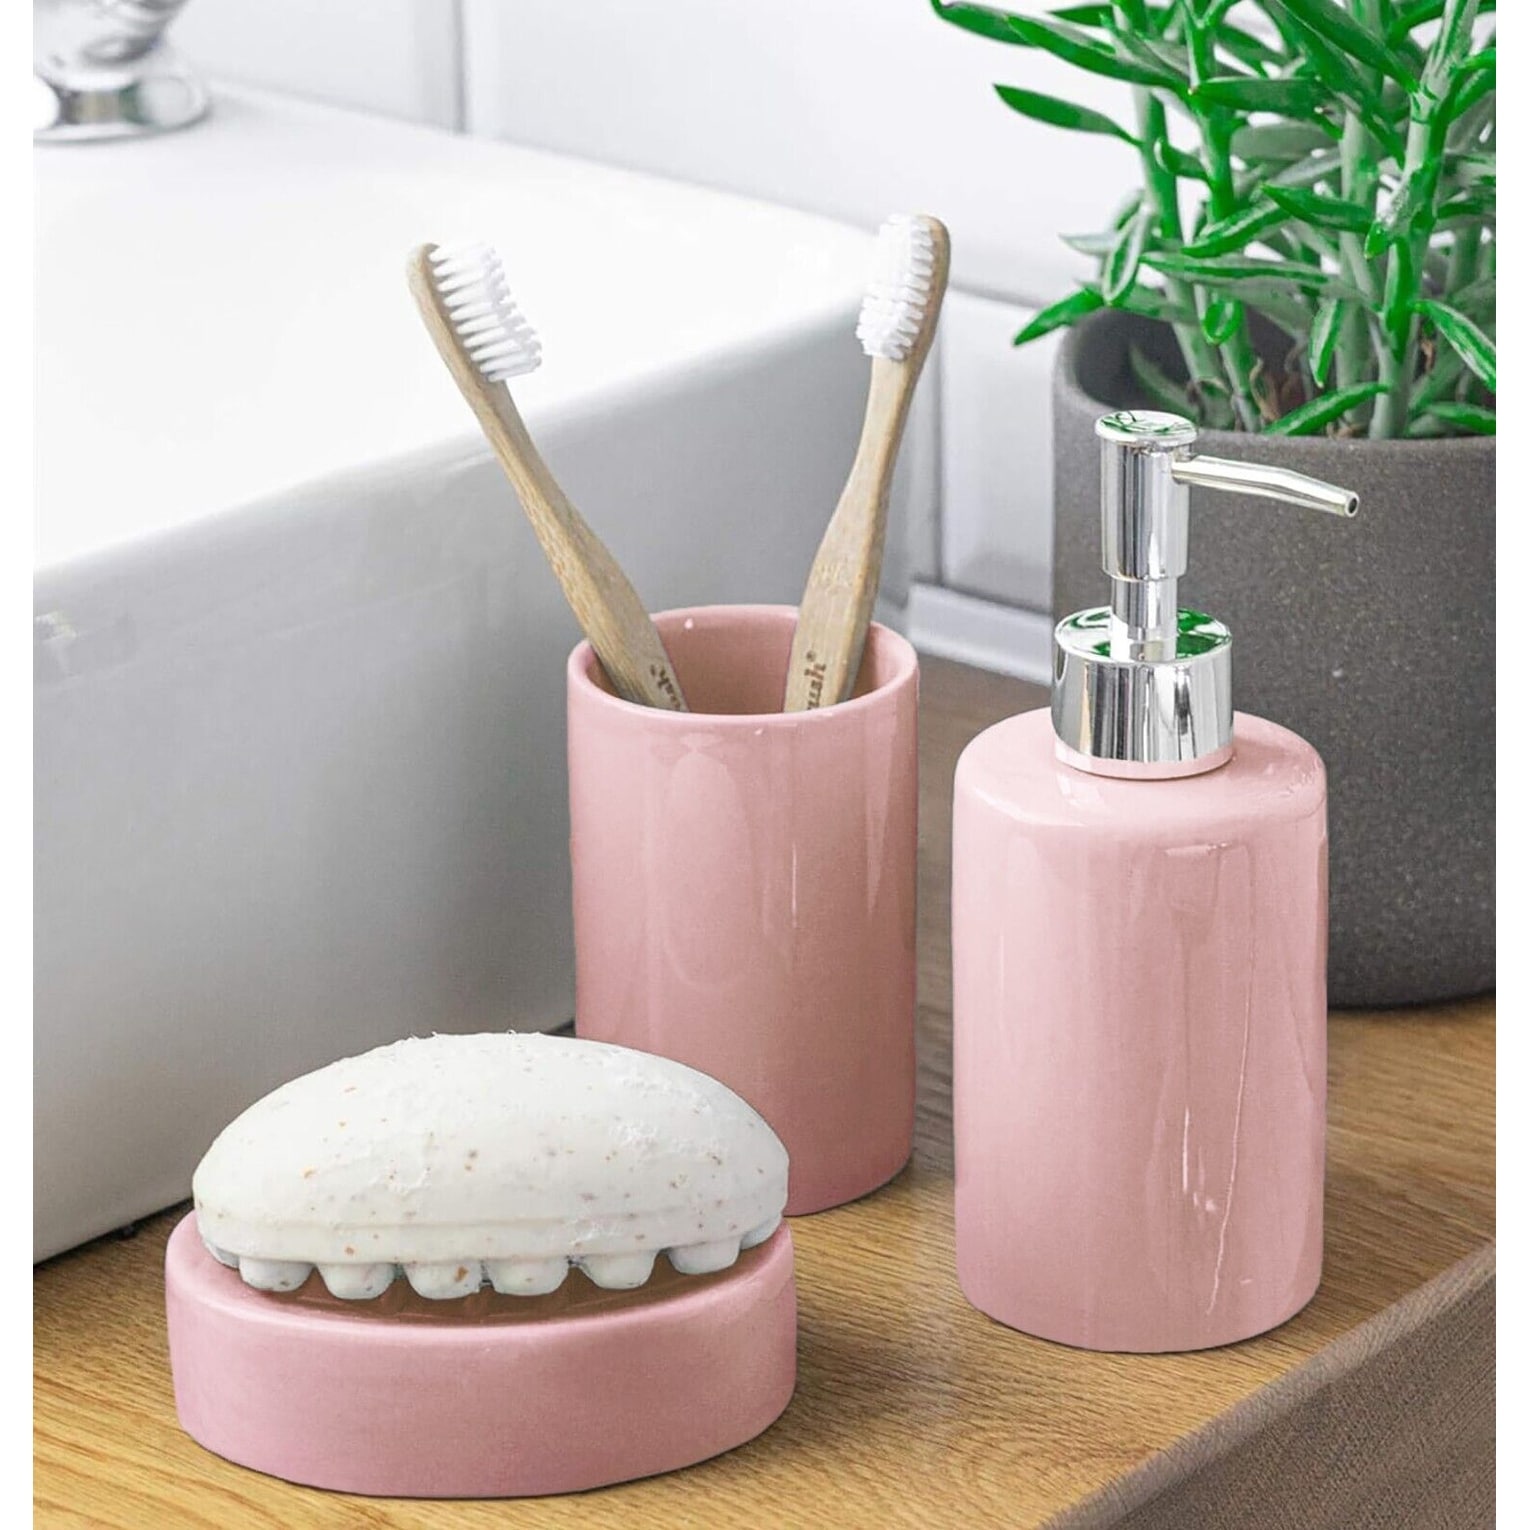 4 Piece Bathroom Accessory Set - Includes Soap Dispenser, Toothbrush Holder,  Tumbler, and Soap Dish - On Sale - Bed Bath & Beyond - 17819109